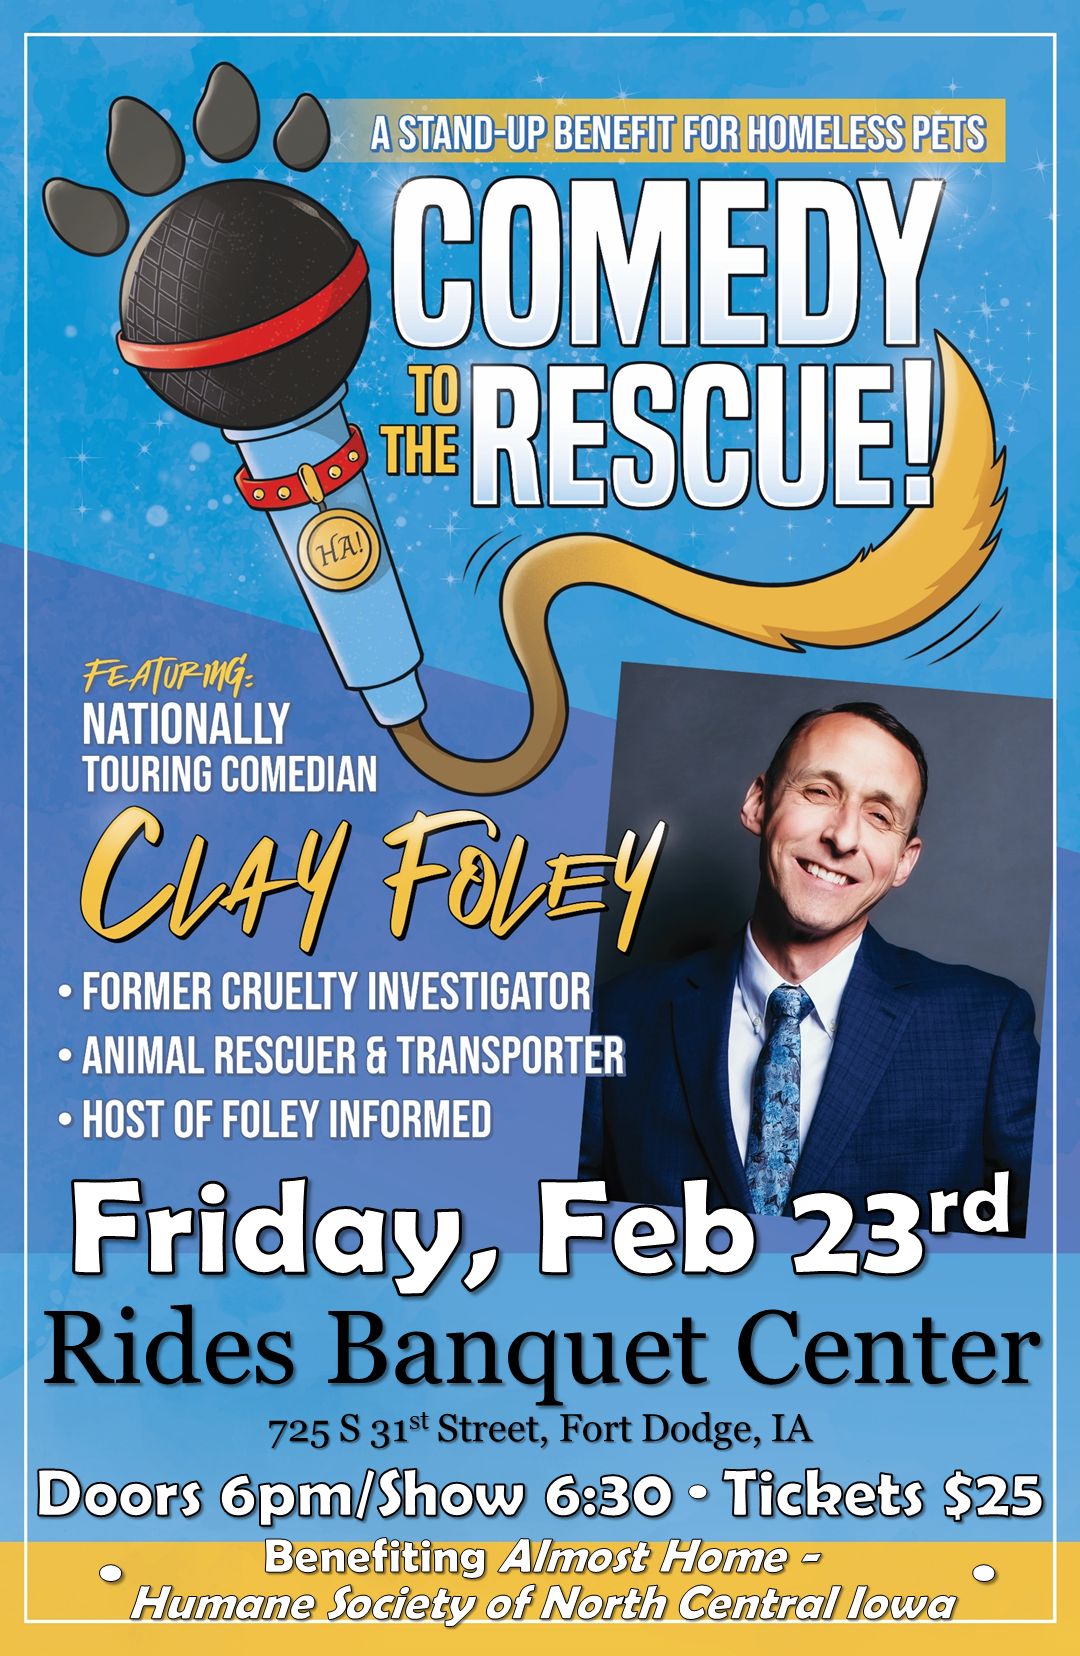 "Comedy to the Rescue" Featuring Clay Foley Benefit for Almost Home Humane Society